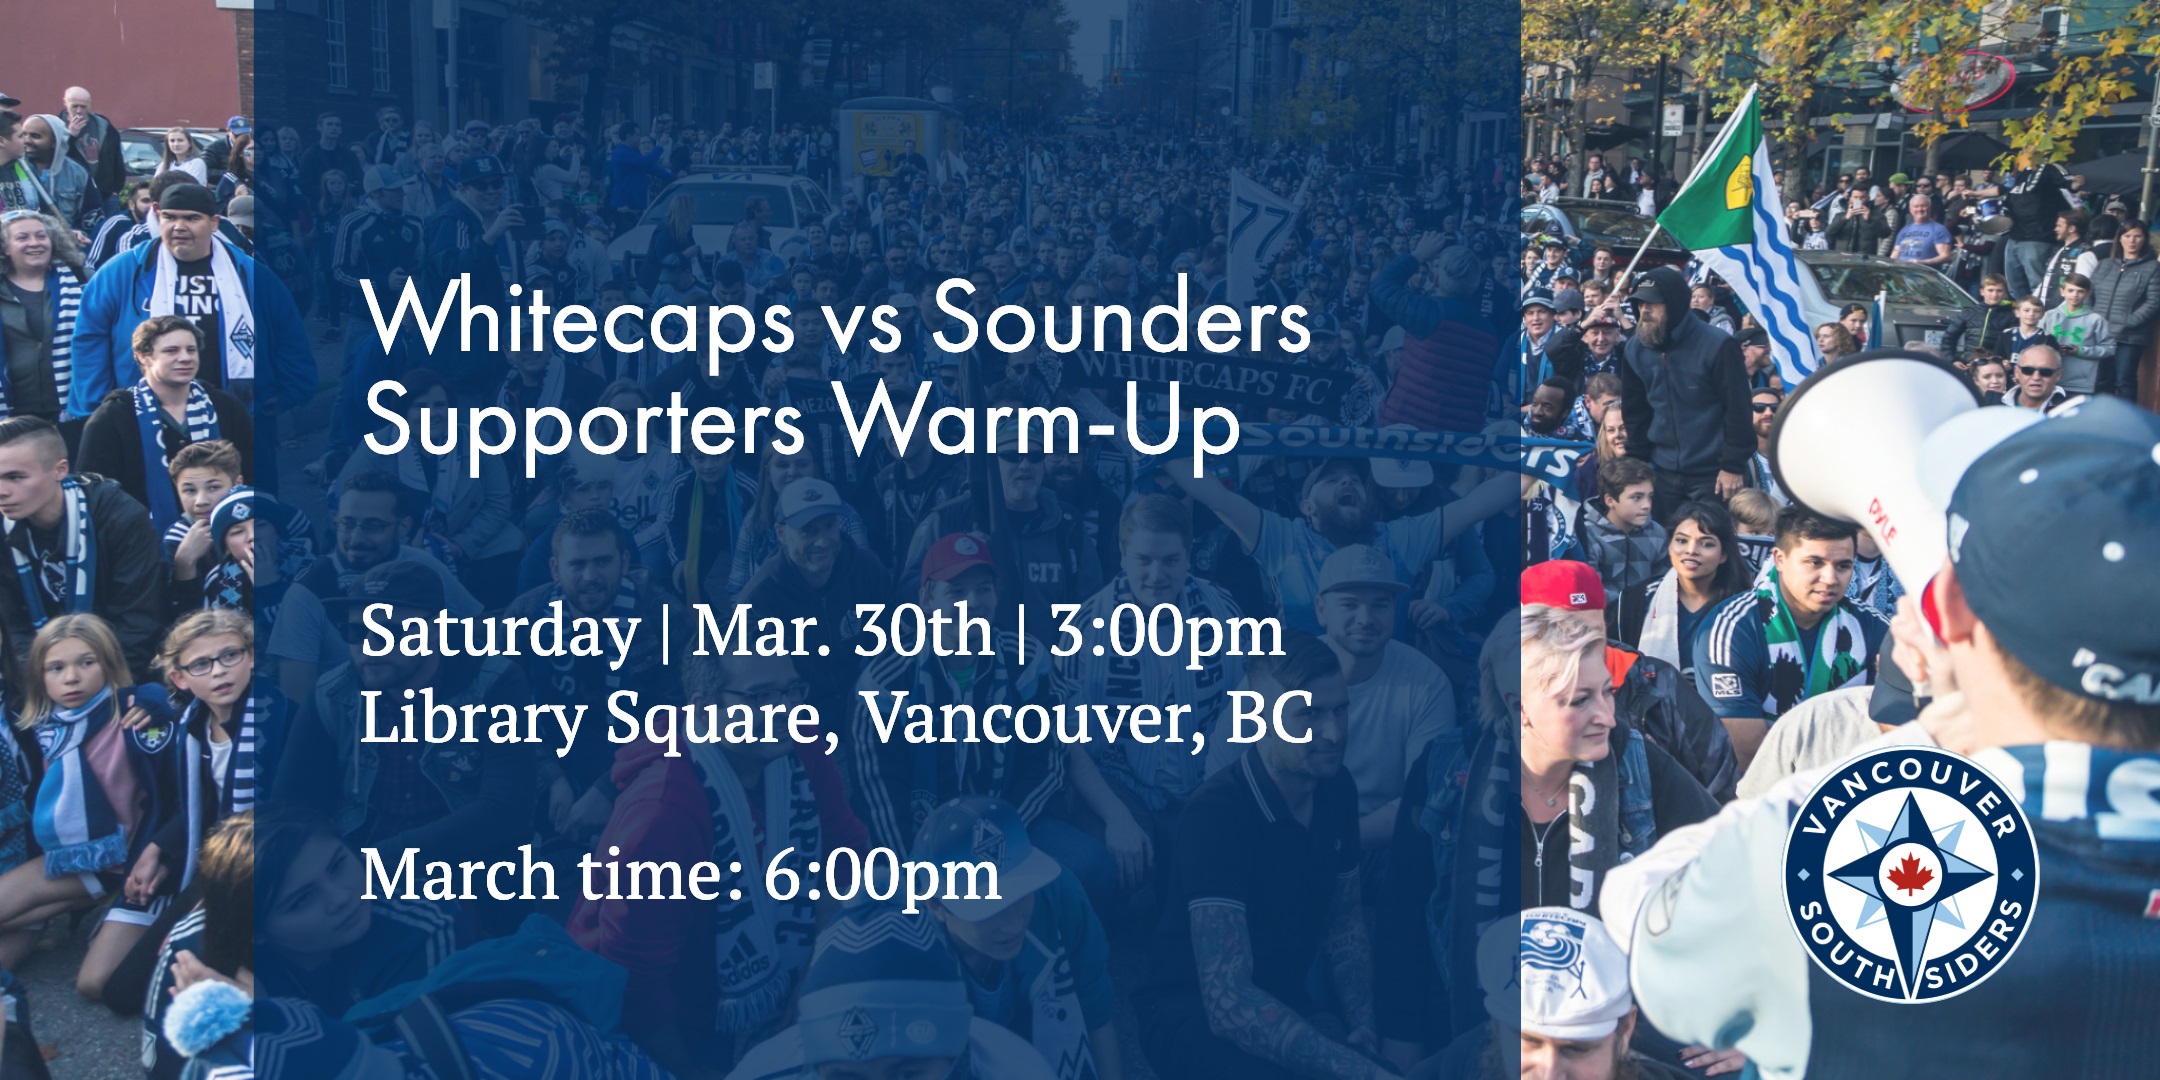 Home game vs Seattle Sounds. Member table open at 3:00pm, march at 6:00pm